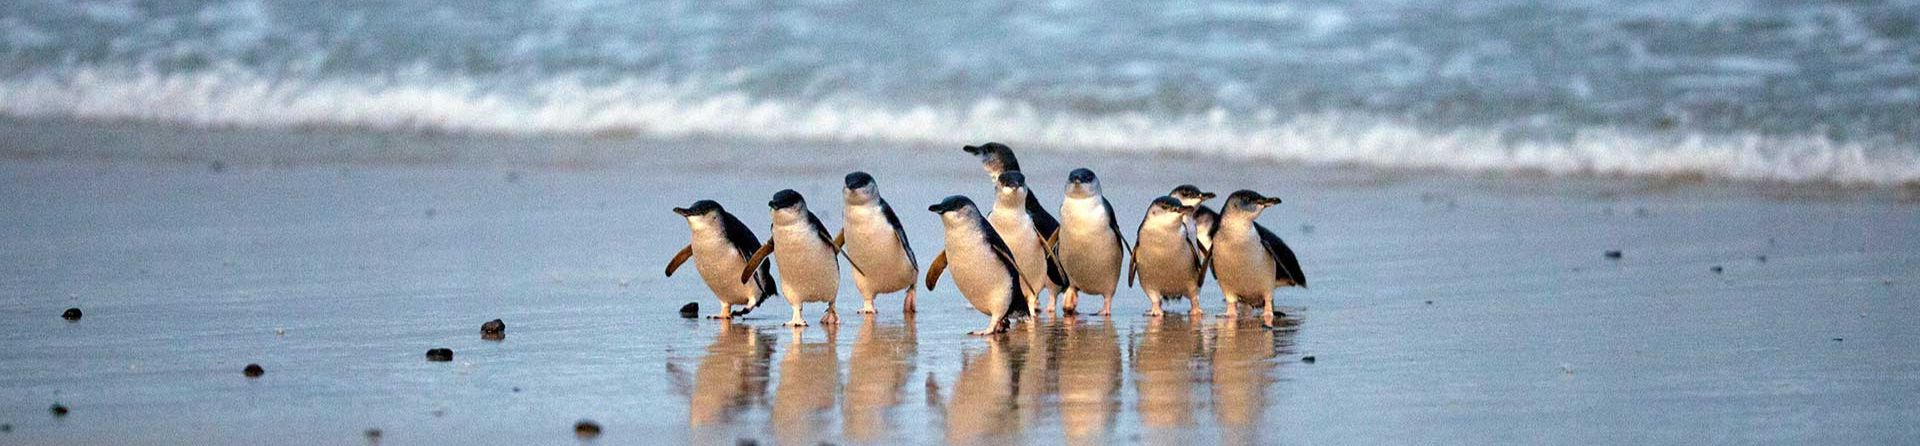 What time of year is best for the Penguin Parade?